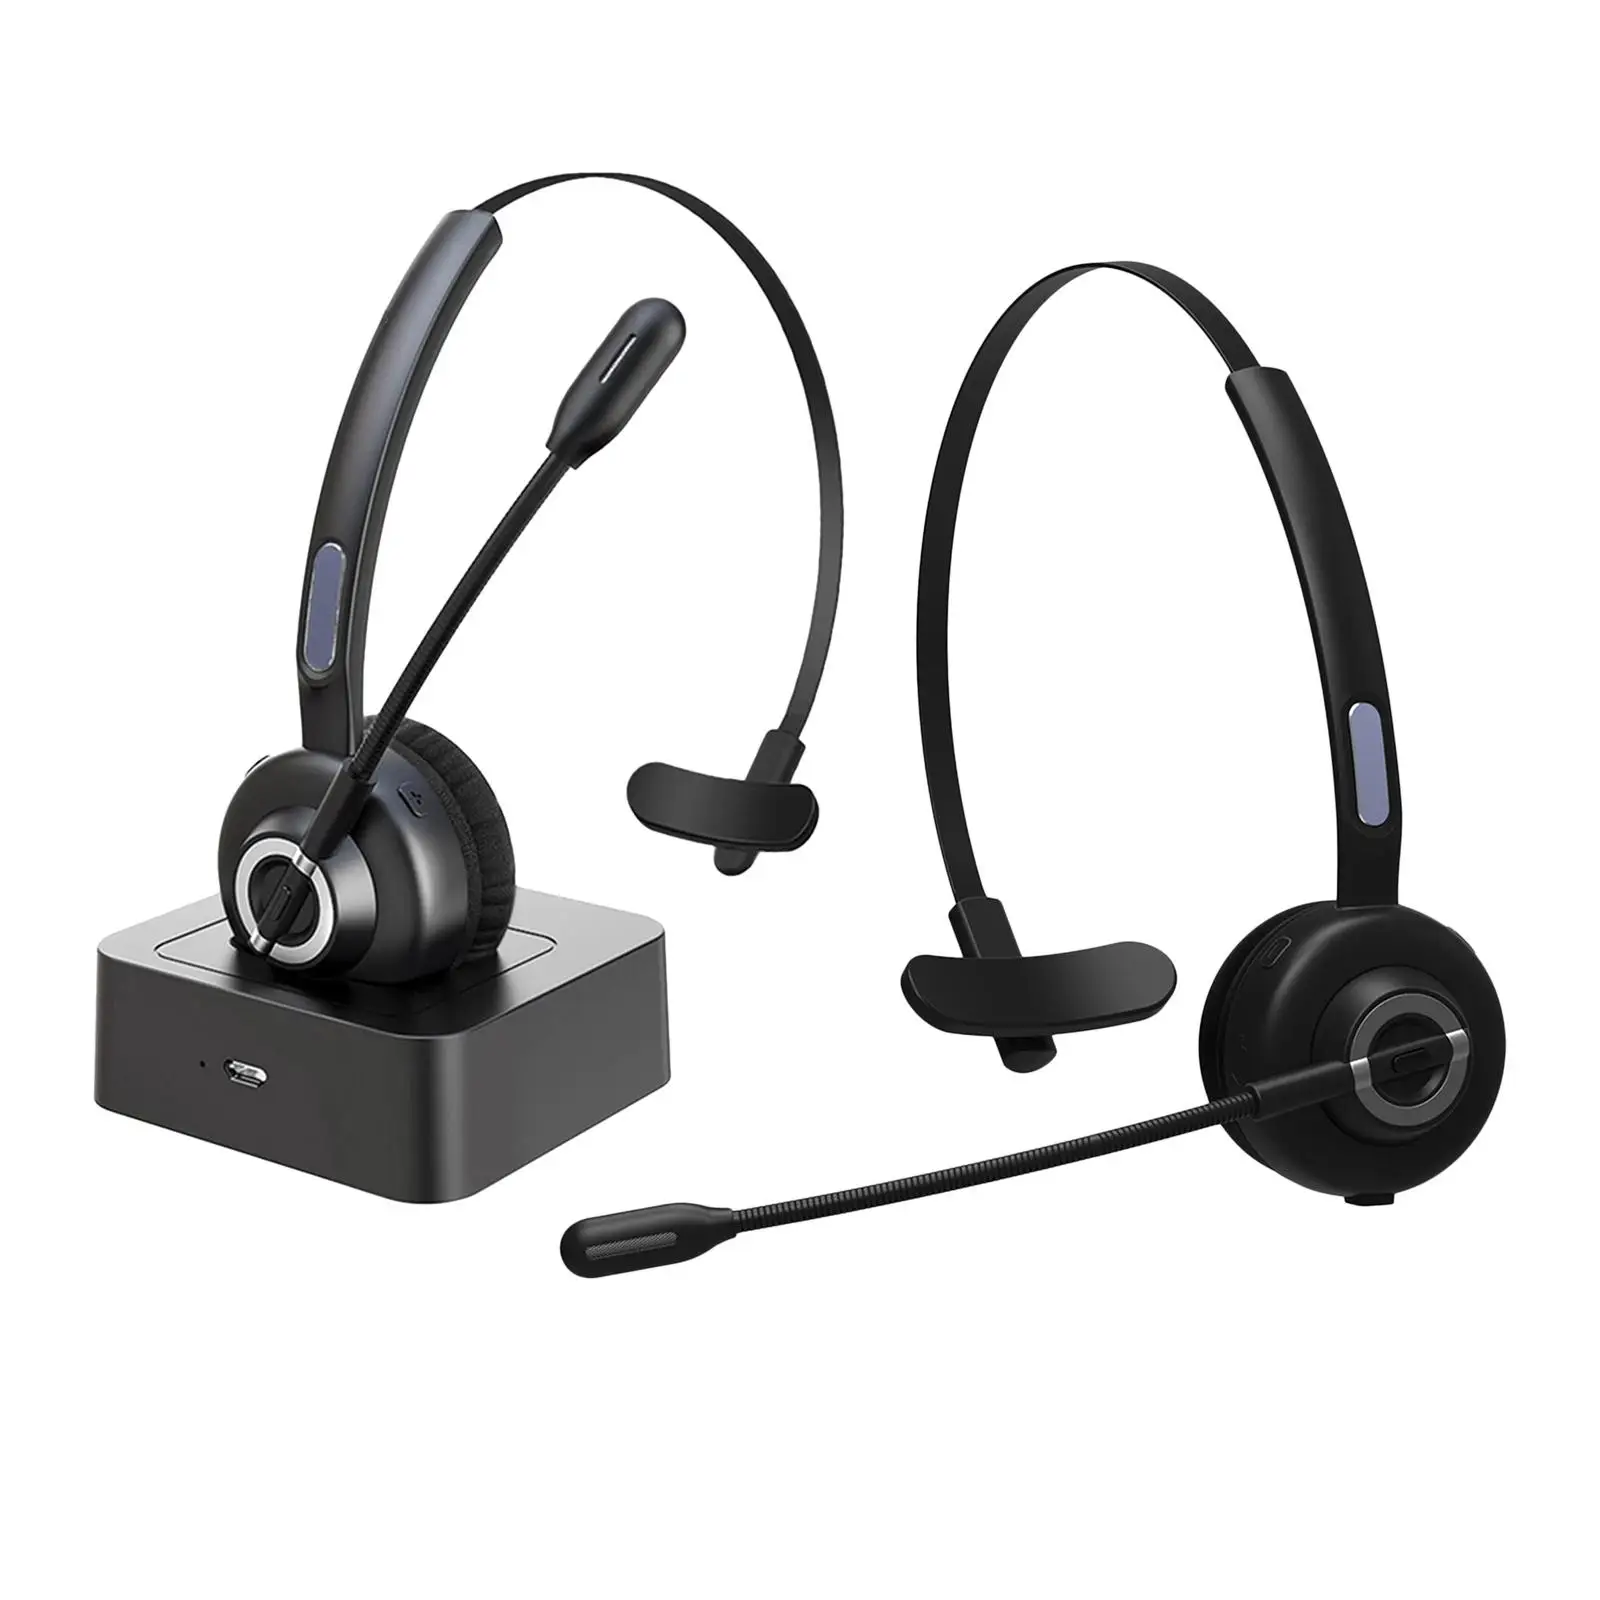  Headset with Microphone, Headset Noise Cancelling Mic, Hands- Headphones for PC Laptop Call Center